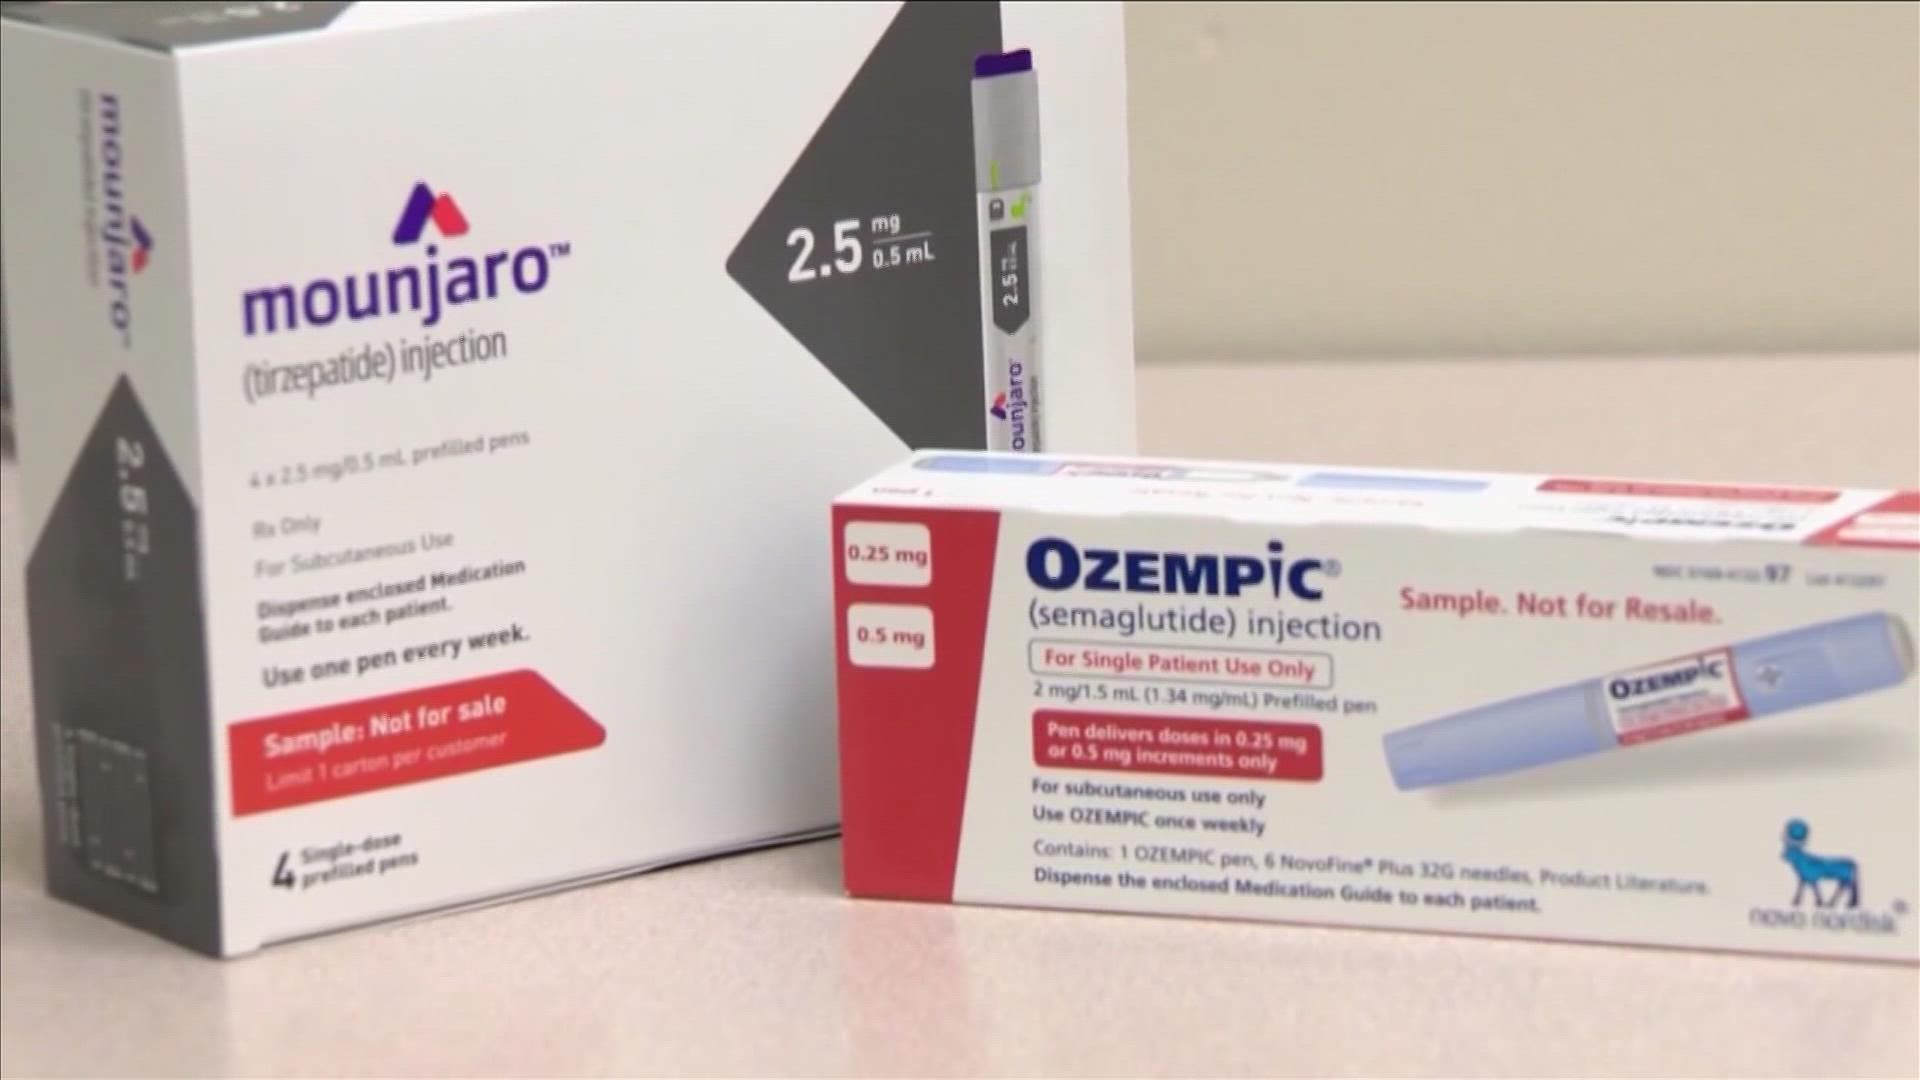 Some of the diabetic medicines - Ozempic, for example, Mounjaro, another - are being used by doctors for not just diabetes, but also weight loss.